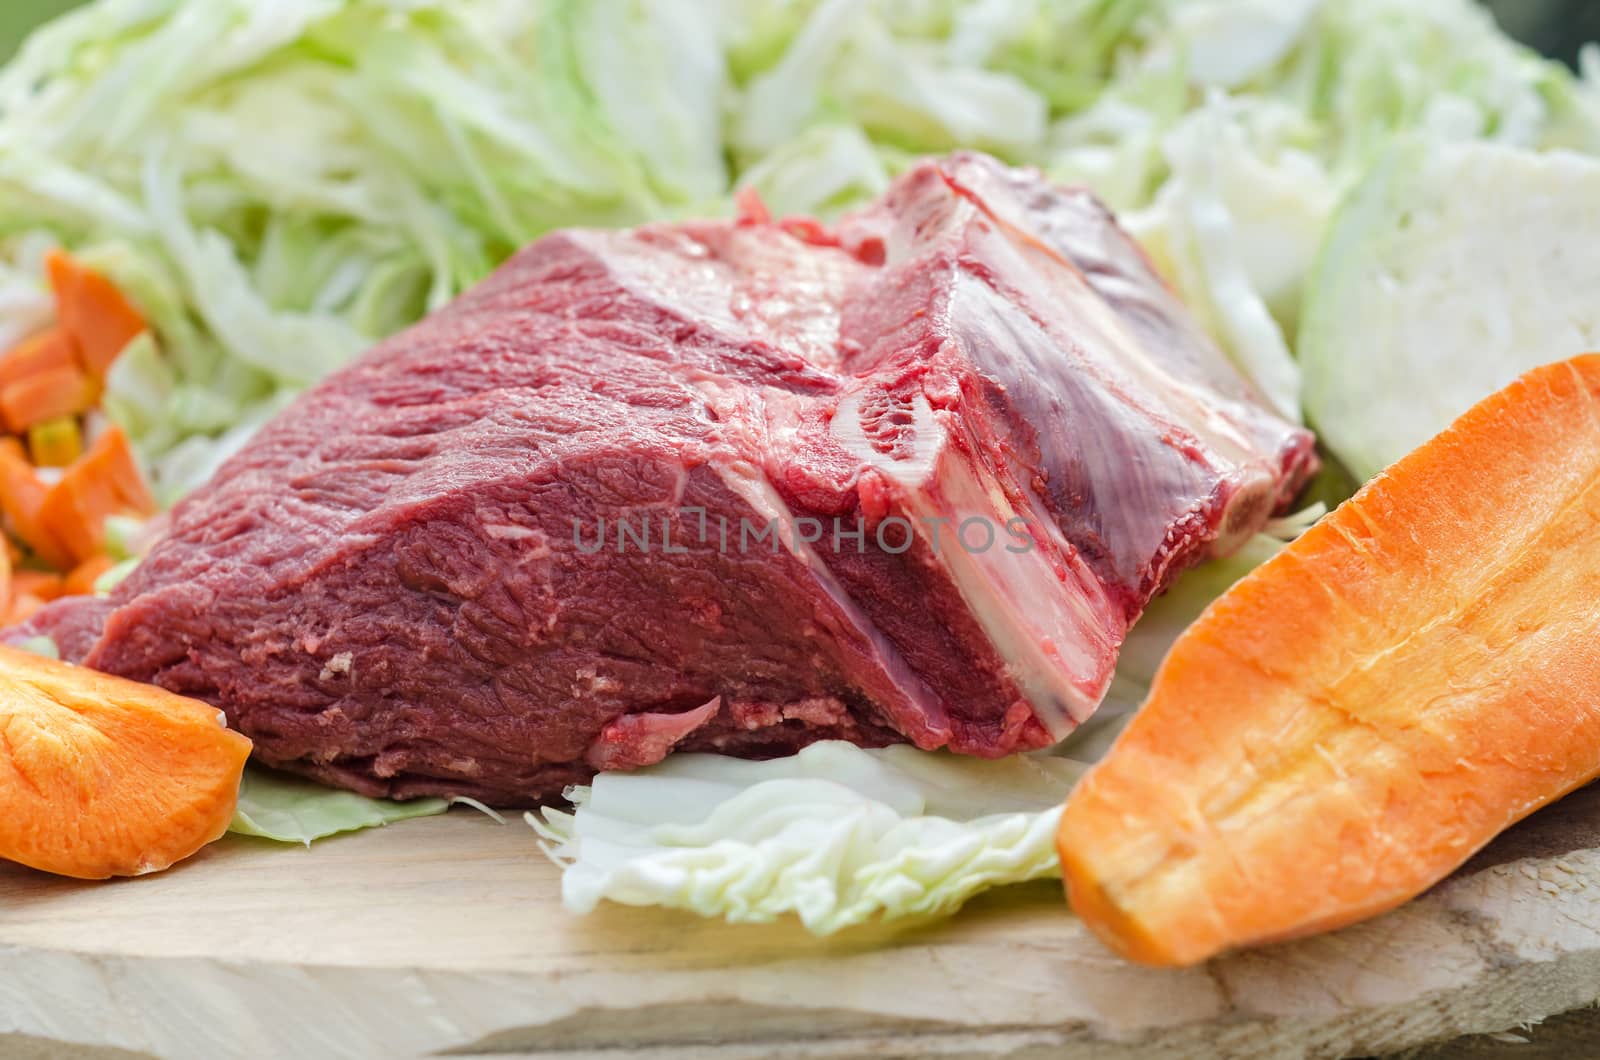 Raw beef and vegetables, ingredients for cooking by Gaina